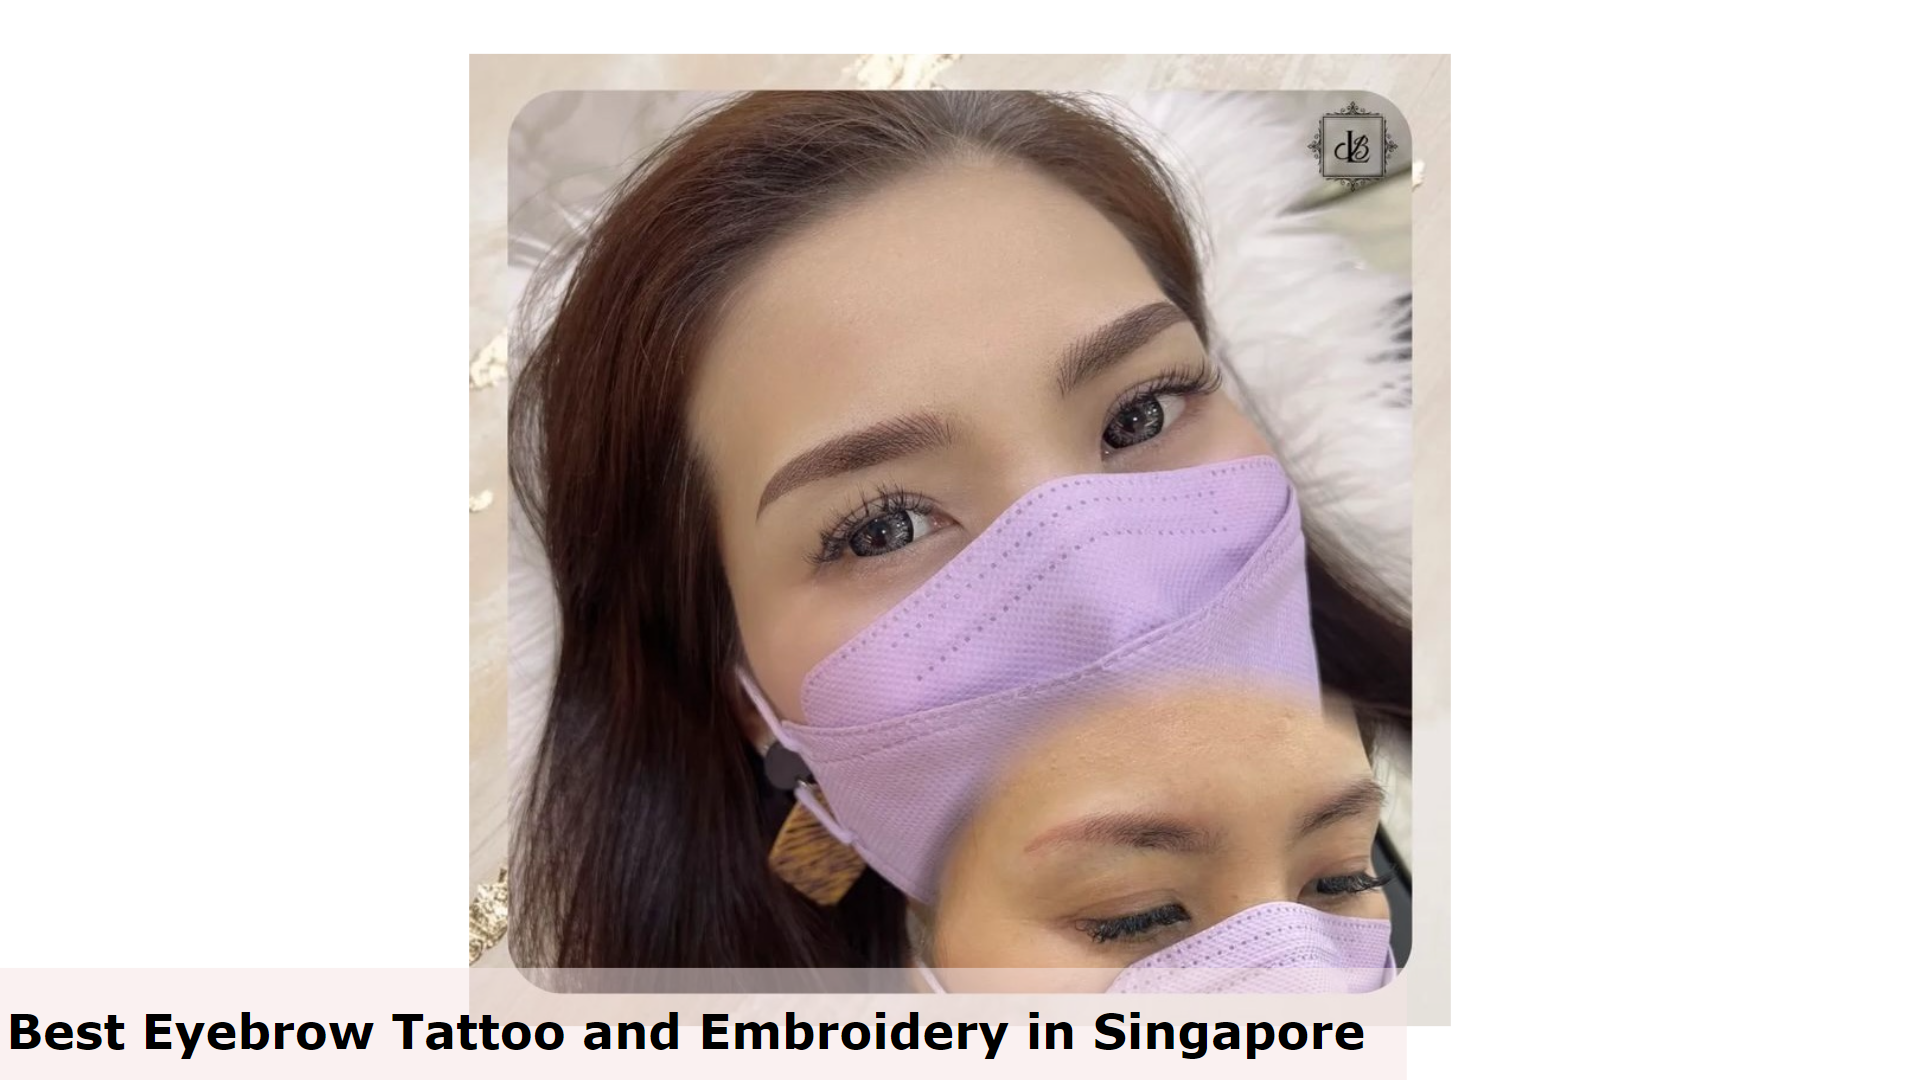 Lebellbrow Studio - Best Eyebrow Tattoo and Embroidery in Singapore, Eyebrow Tattoo and Embroidery Singapore, Are eyebrow tattoos embroidery?, best eyebrow embroidery salons in Singapore, Is eyebrow embroidery the same as microblading?, How long will your eyebrow embroidery last?, What is the difference between Eyebrow Tattoo & Eyebrow Embroidery?, What is eyebrow embroidery Singapore?, How long does it take for eyebrow embroidery to heal?, cheap and good eyebrow embroidery singapore, eyebrow embroidery singapore price, eyebrow microblading singapore, home-based eyebrow embroidery singapore, korean eyebrow embroidery singapore, eyebrow embroidery singapore review, eyebrow tattoo singapore, 